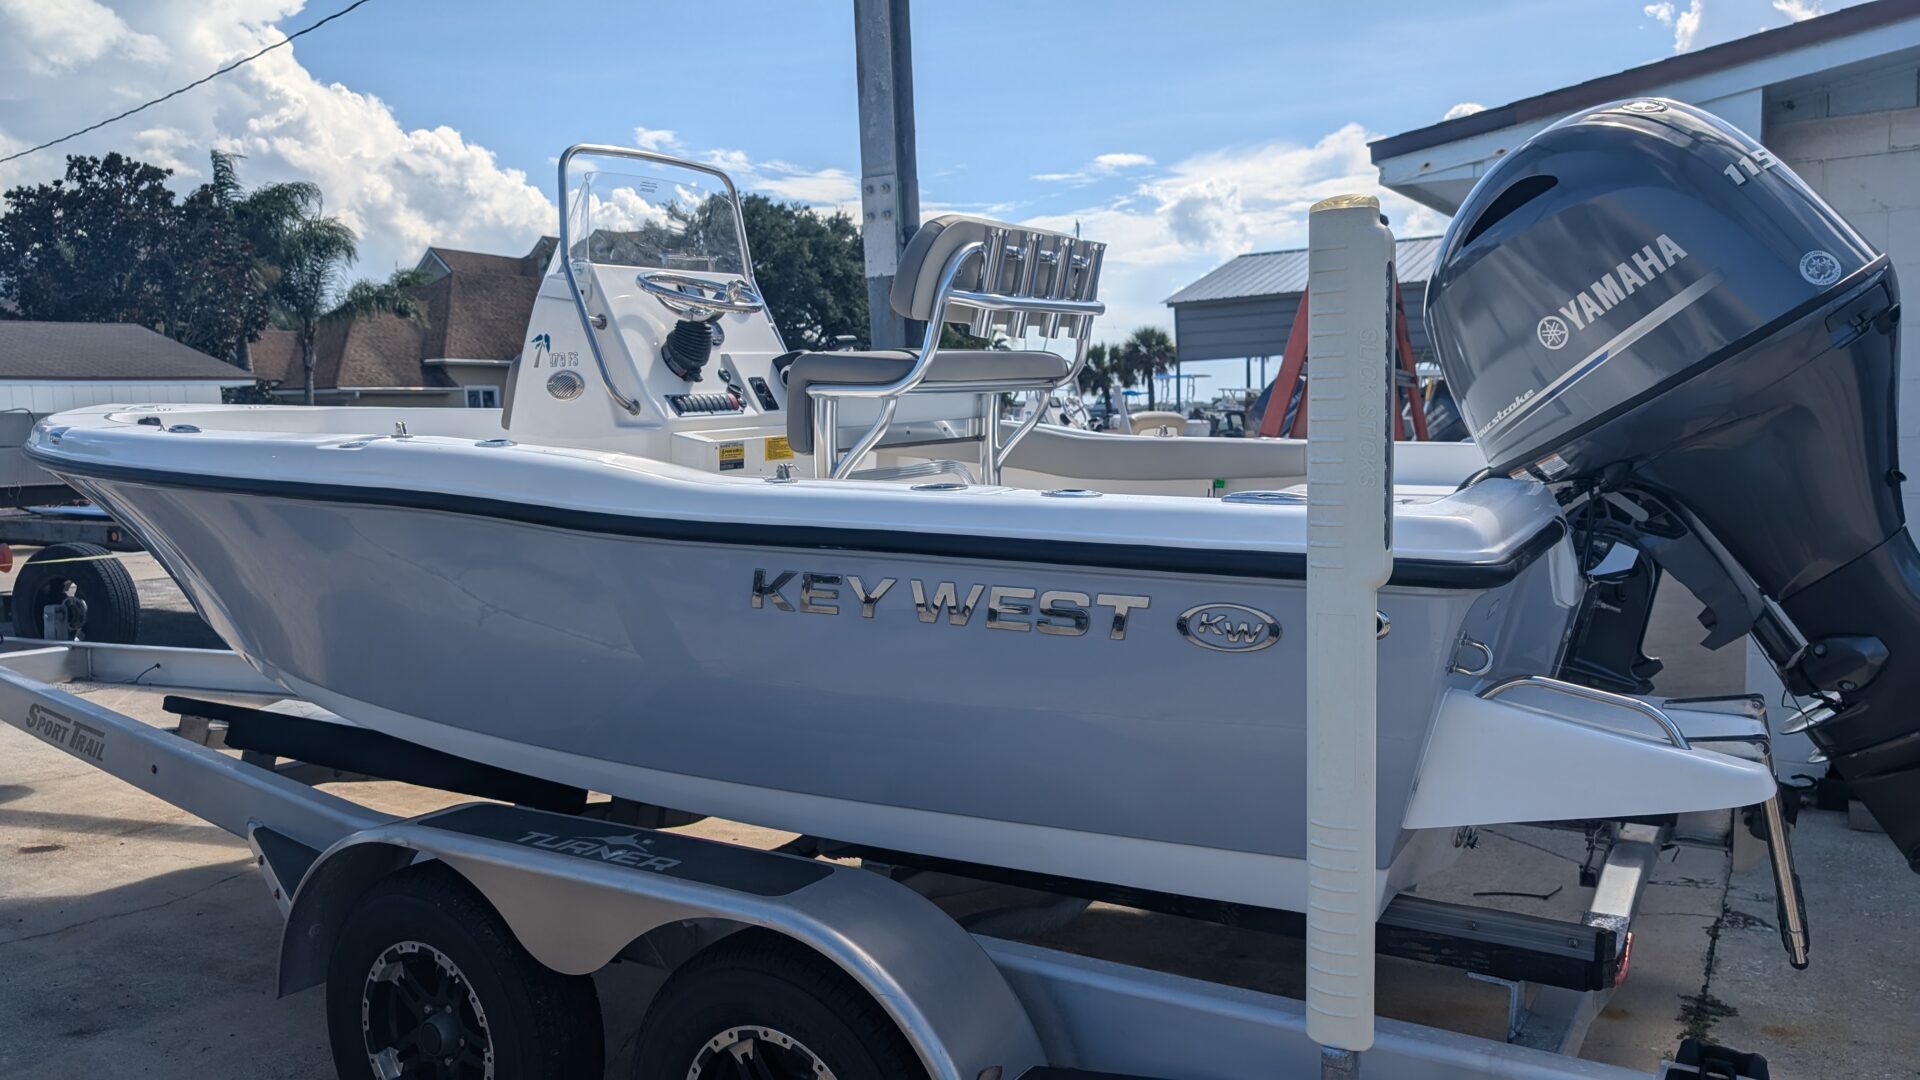 New Key West 179F4, New Boats for Sale, Boats for Sale. Used Boats for Sale, Boats for sale near me 